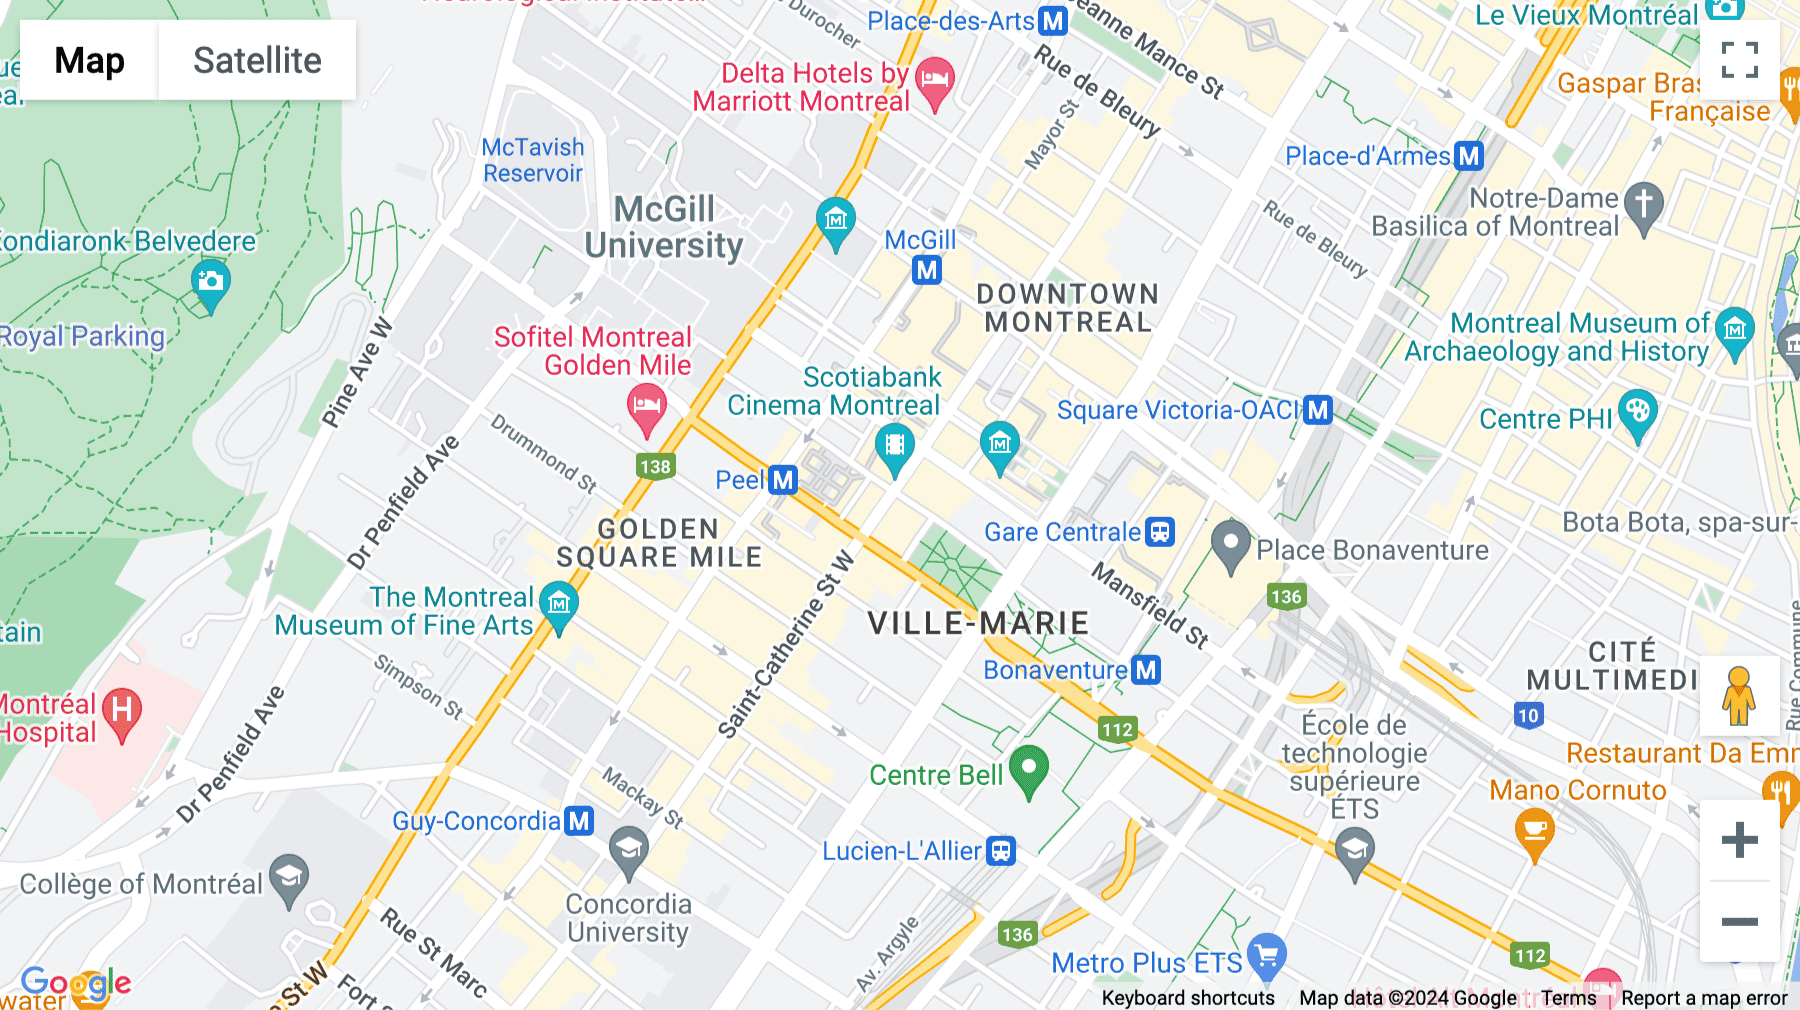 Click for interative map of 1010 Rue Sainte-Catherine Ouest, Montréal, Canada, Montreal